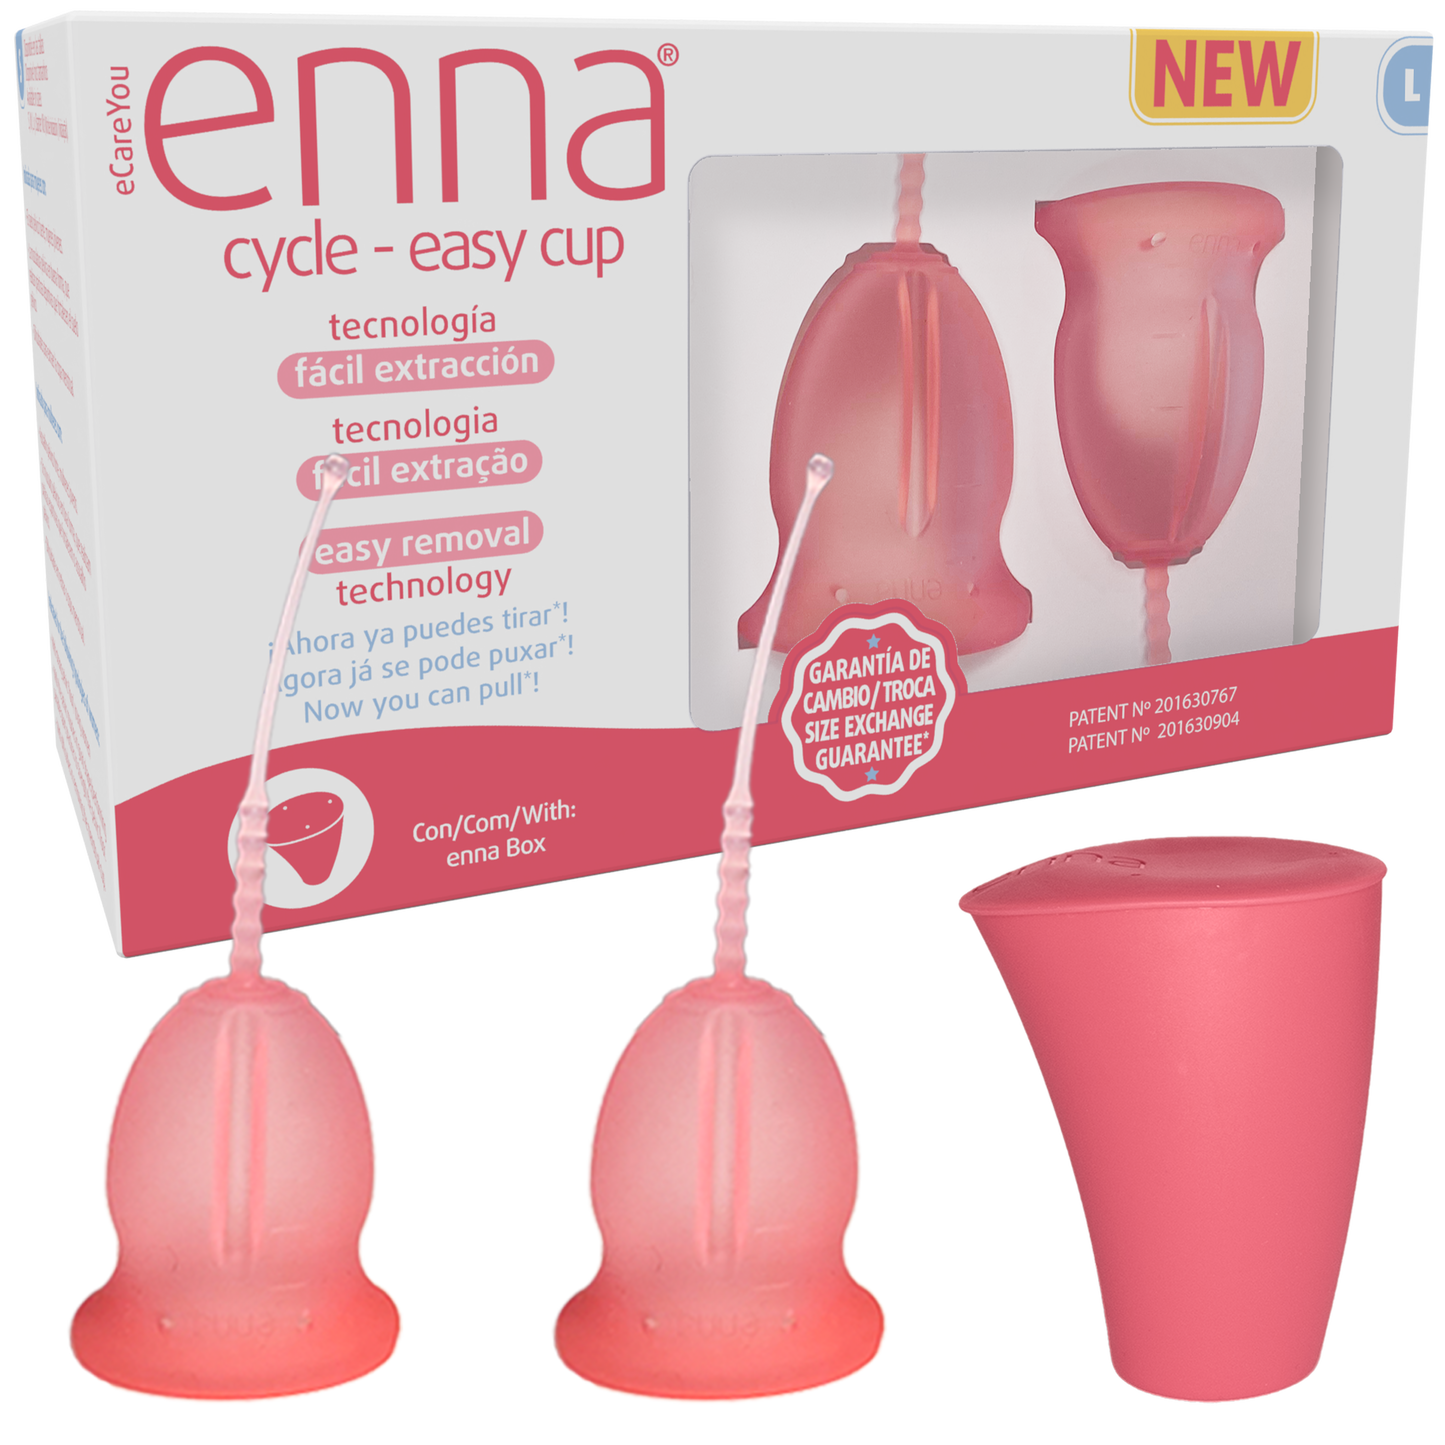 ENNA CYCLE – EASY CUP